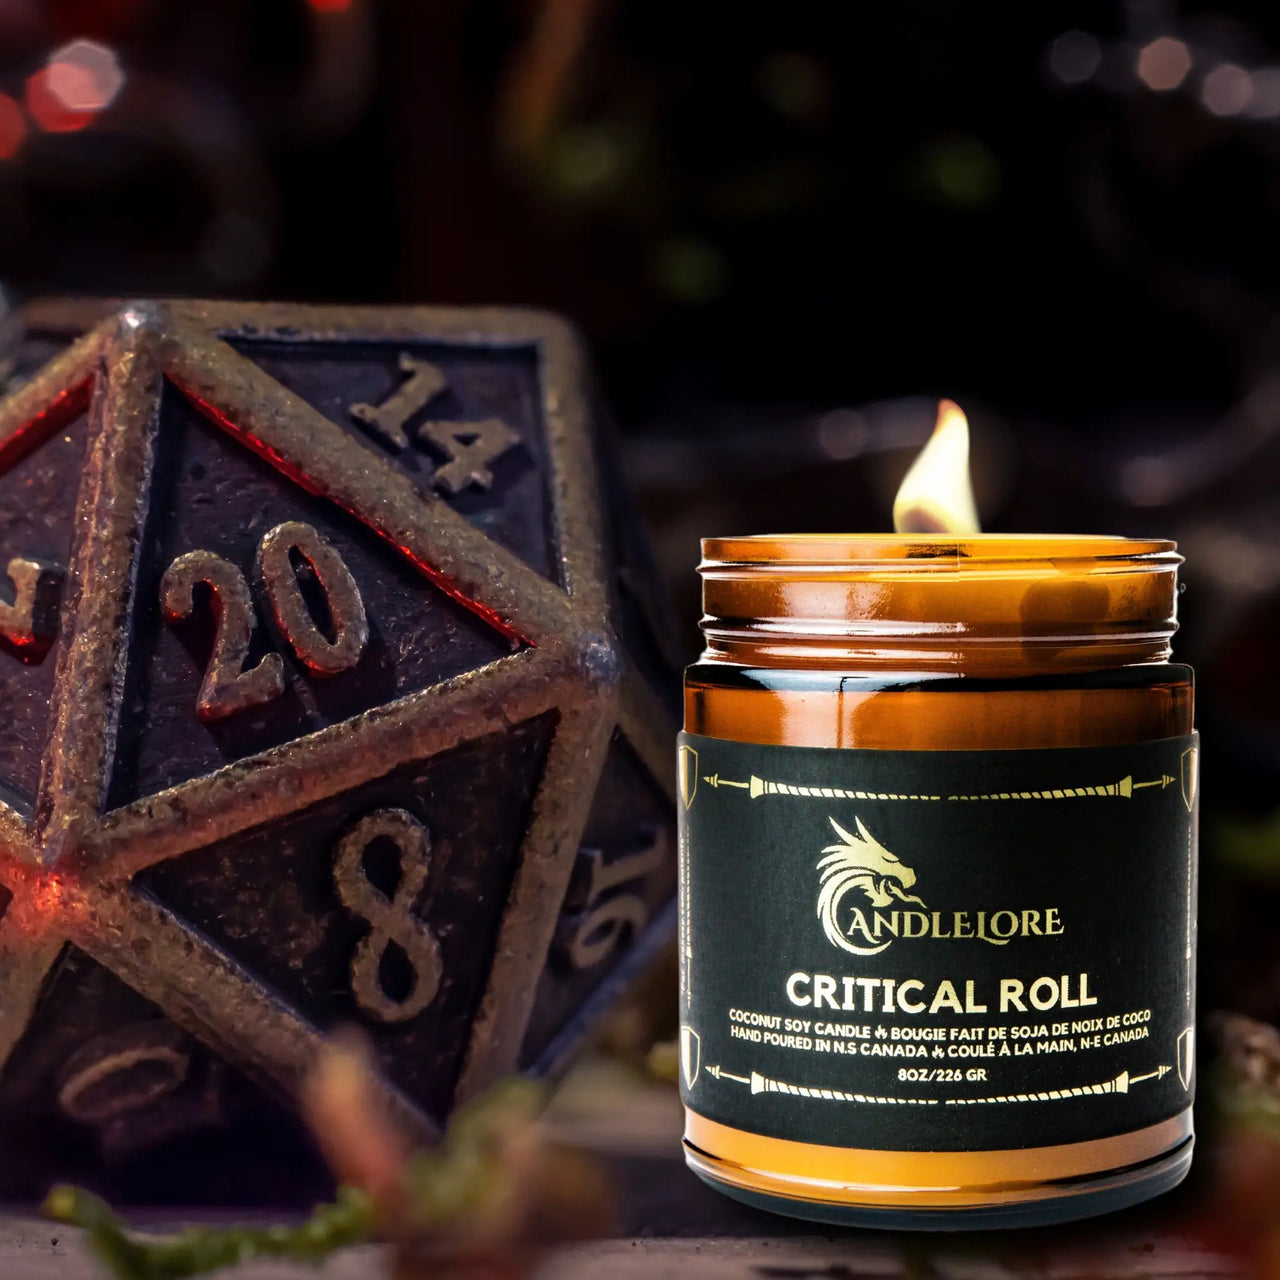 Crtical Roll Candle with a d20 beside it